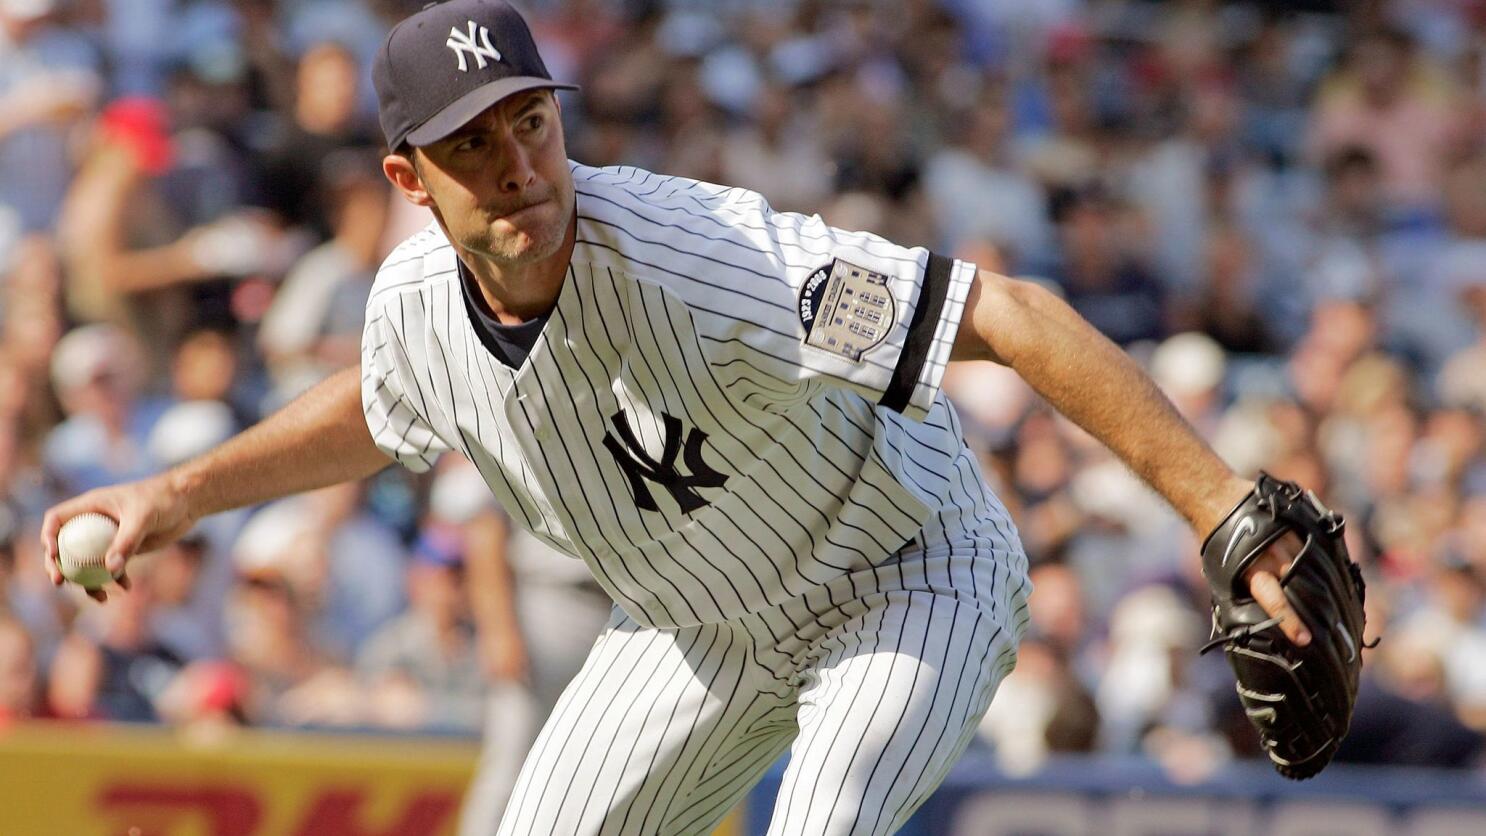 Entering Cooperstown without a logo is as distinctly Mike Mussina